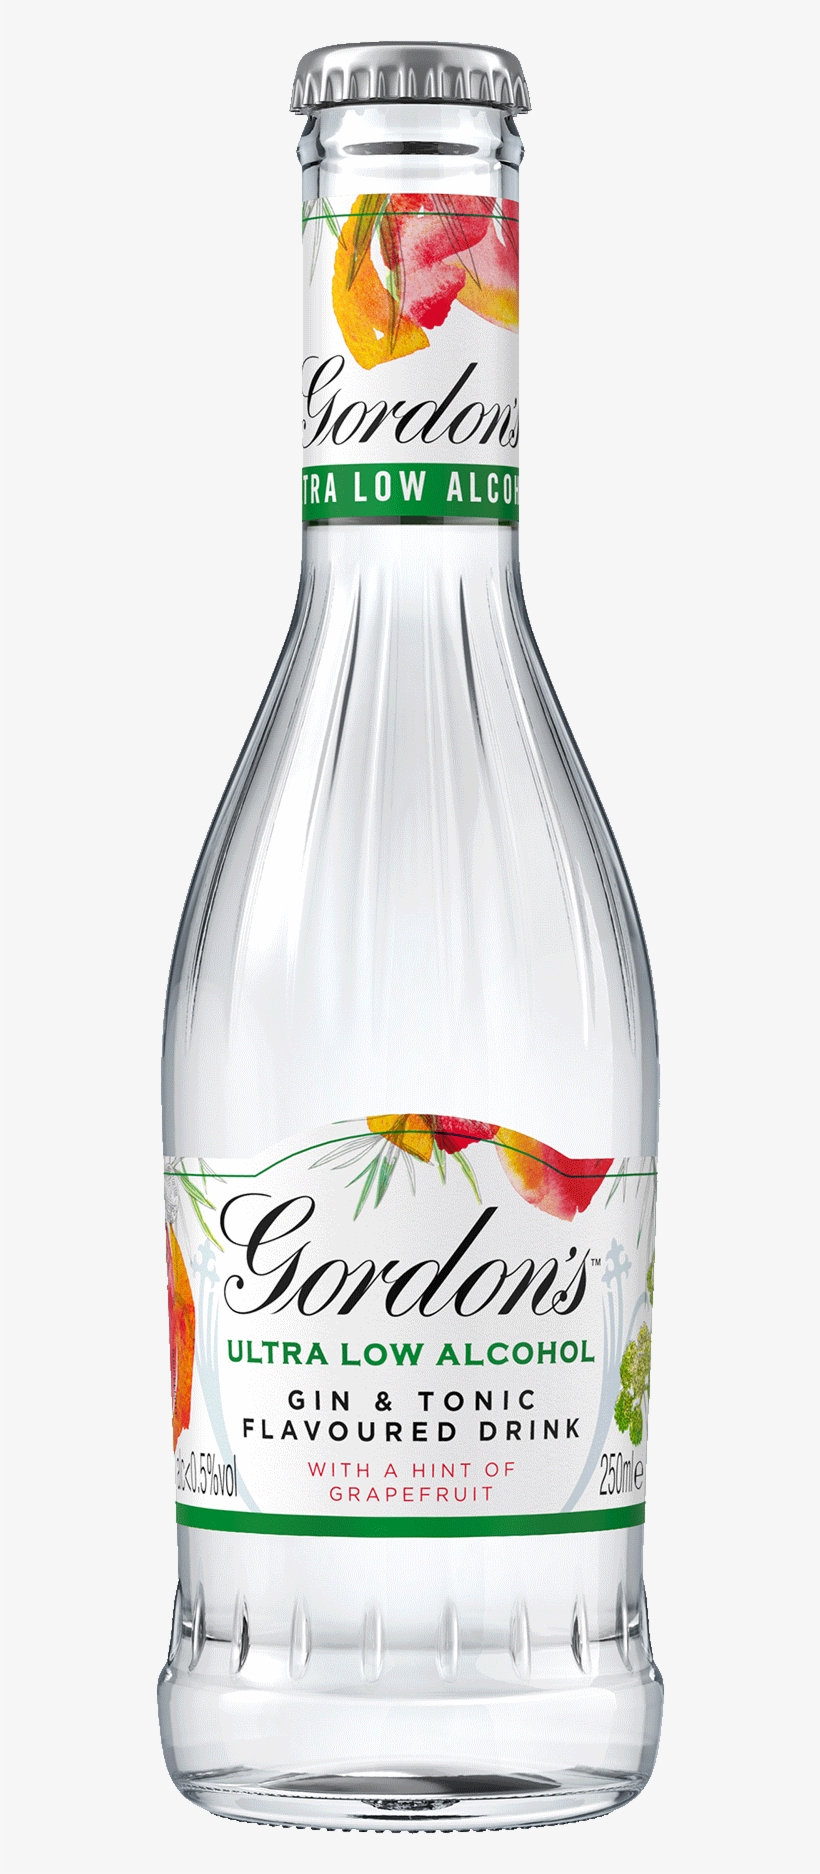 Coriander Seeds, Angelica Root, Liquorice, Orris Root - Gordons Ultra Low Alcohol Gin And Tonic, transparent png #9768469